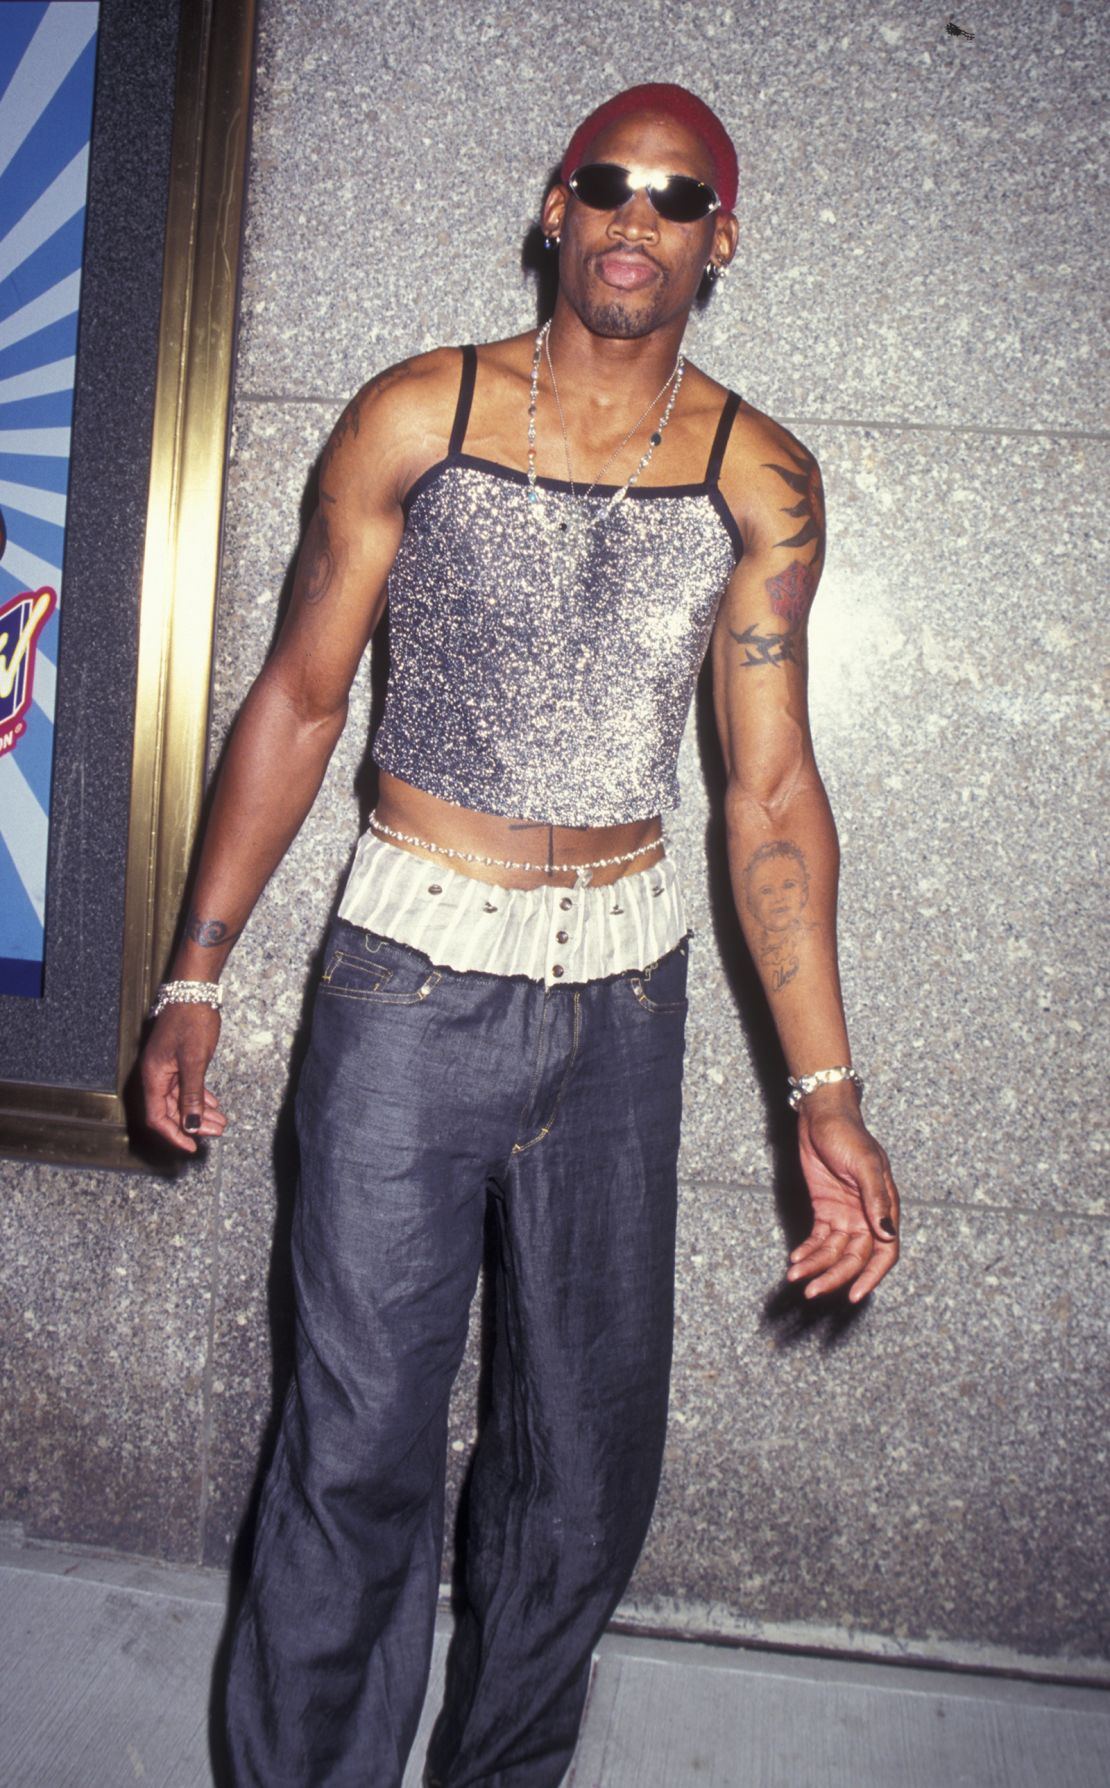 Dennis Rodman wore a sparkly top to the 12th Annual MTV Video Music Awards.